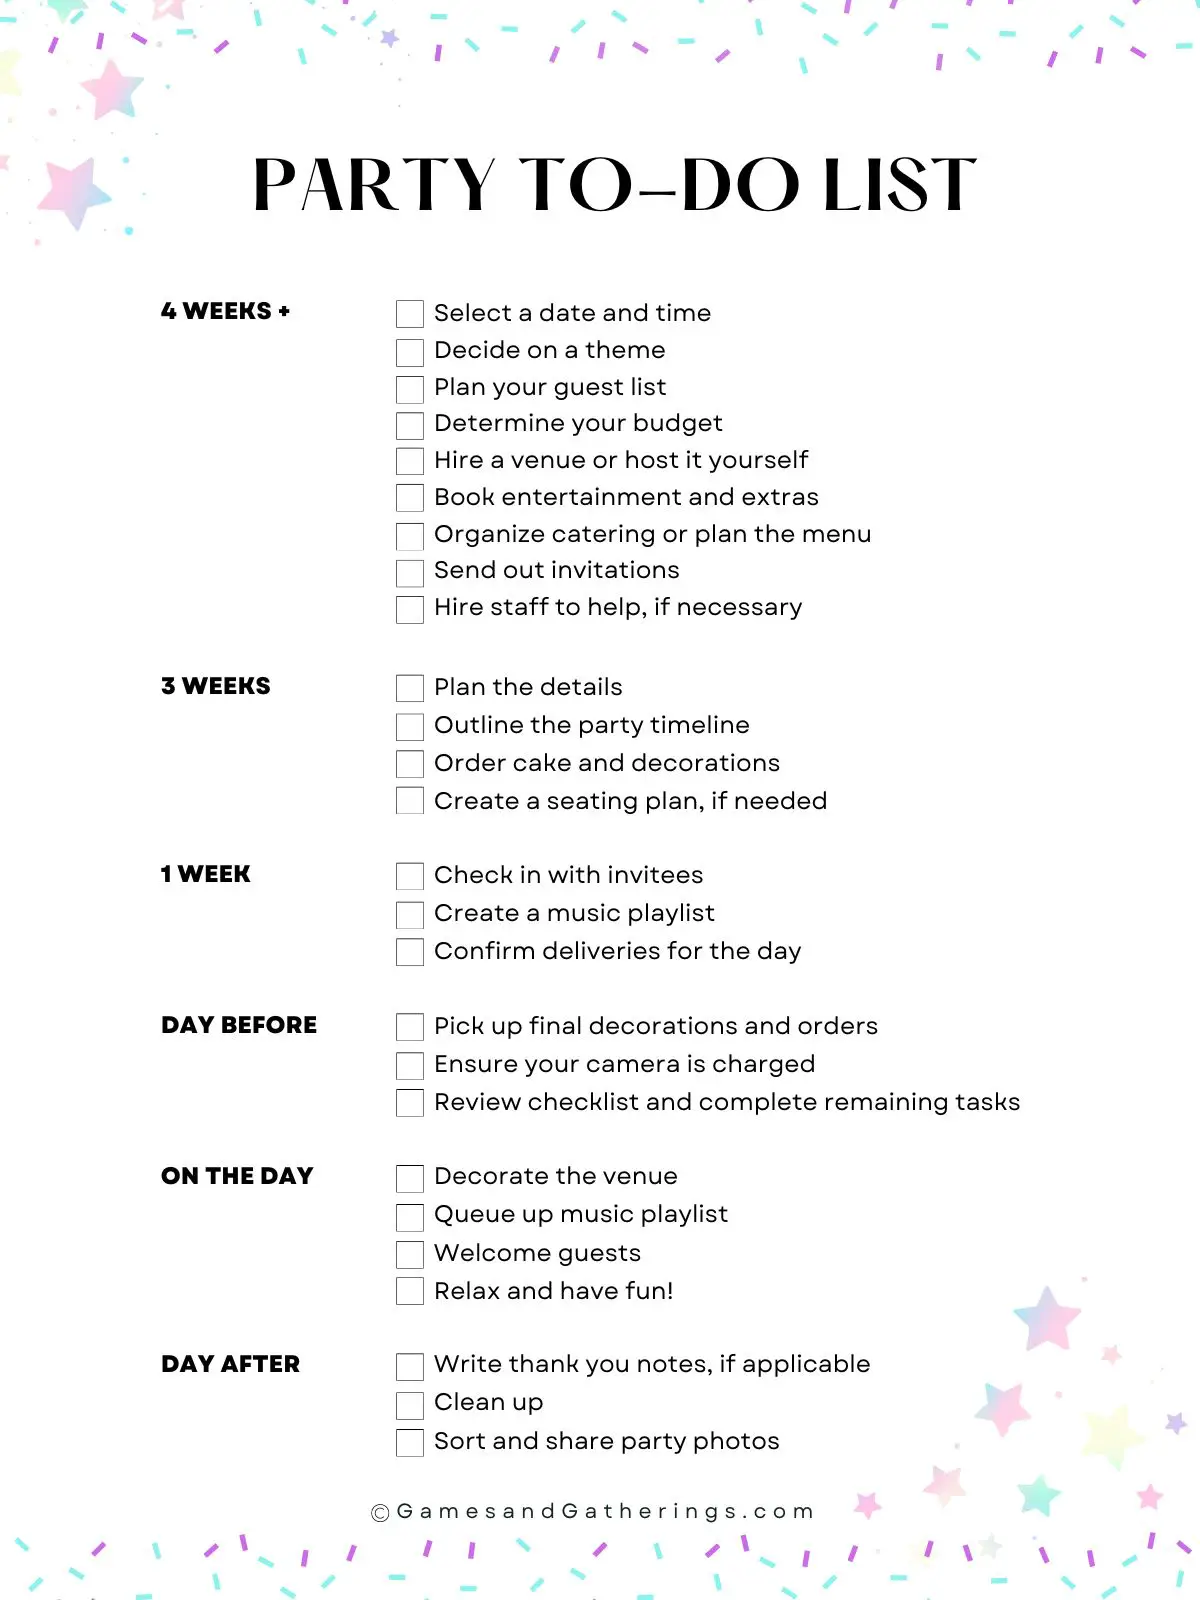 A party planning checklist.